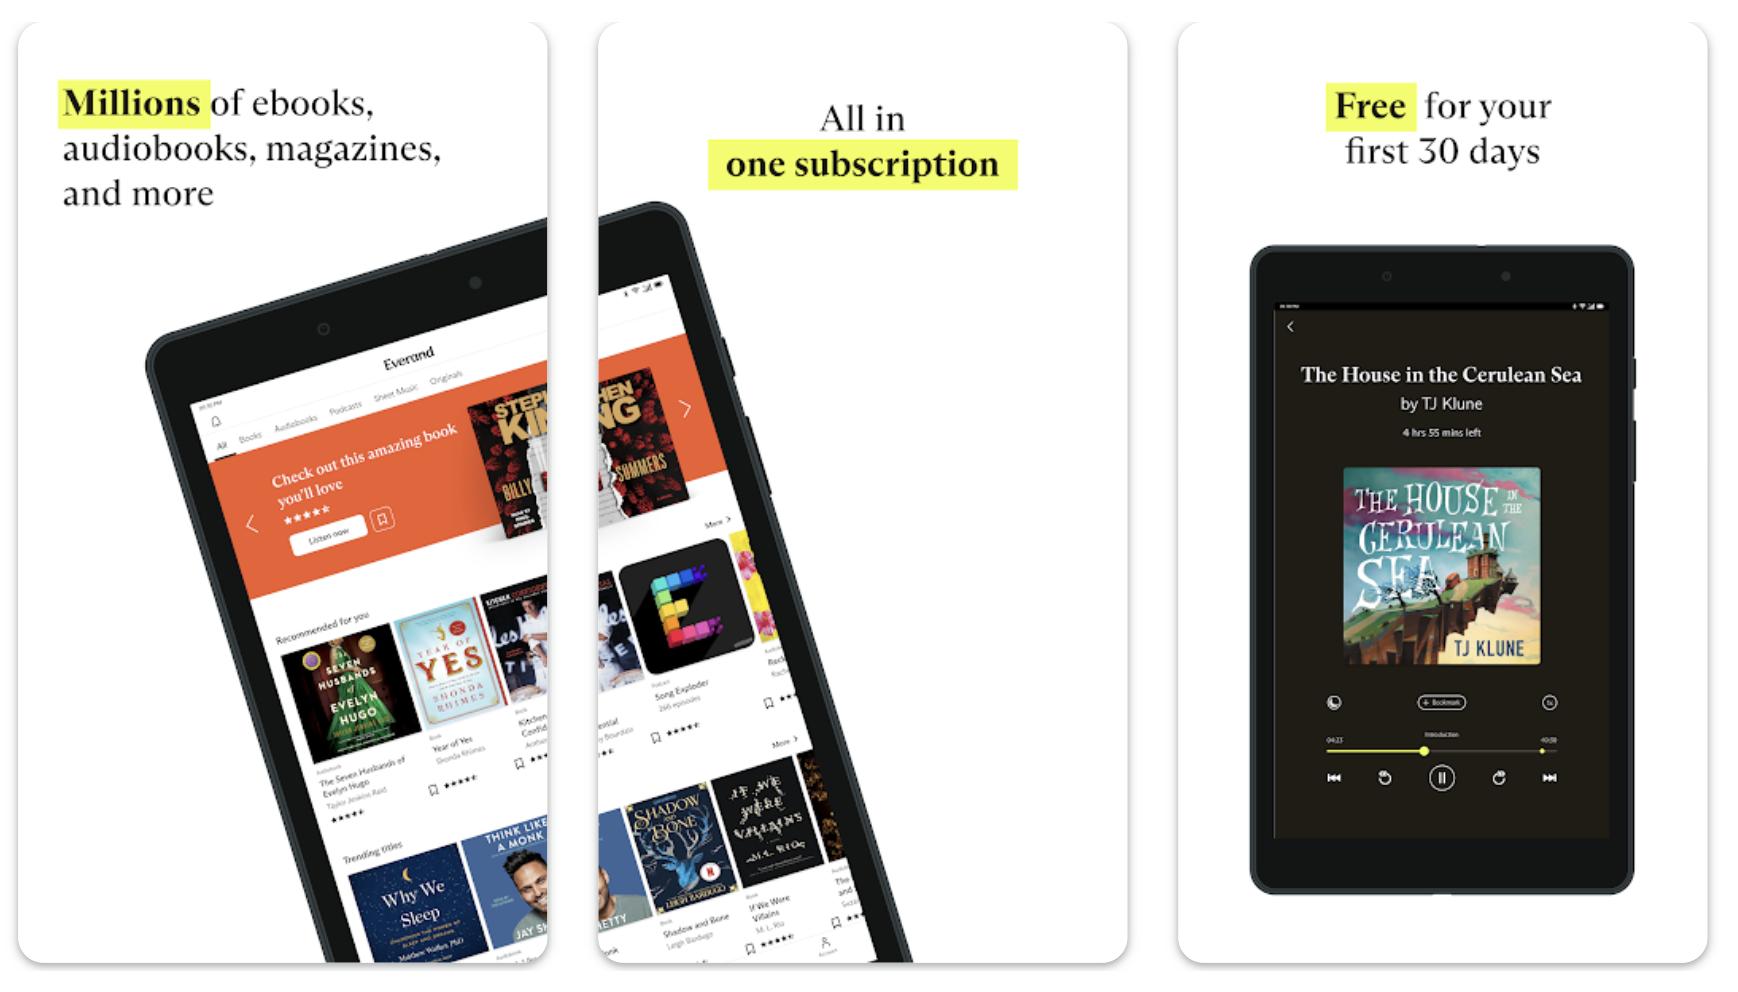 Book titles shown on the Everand app on an iPad and mobile